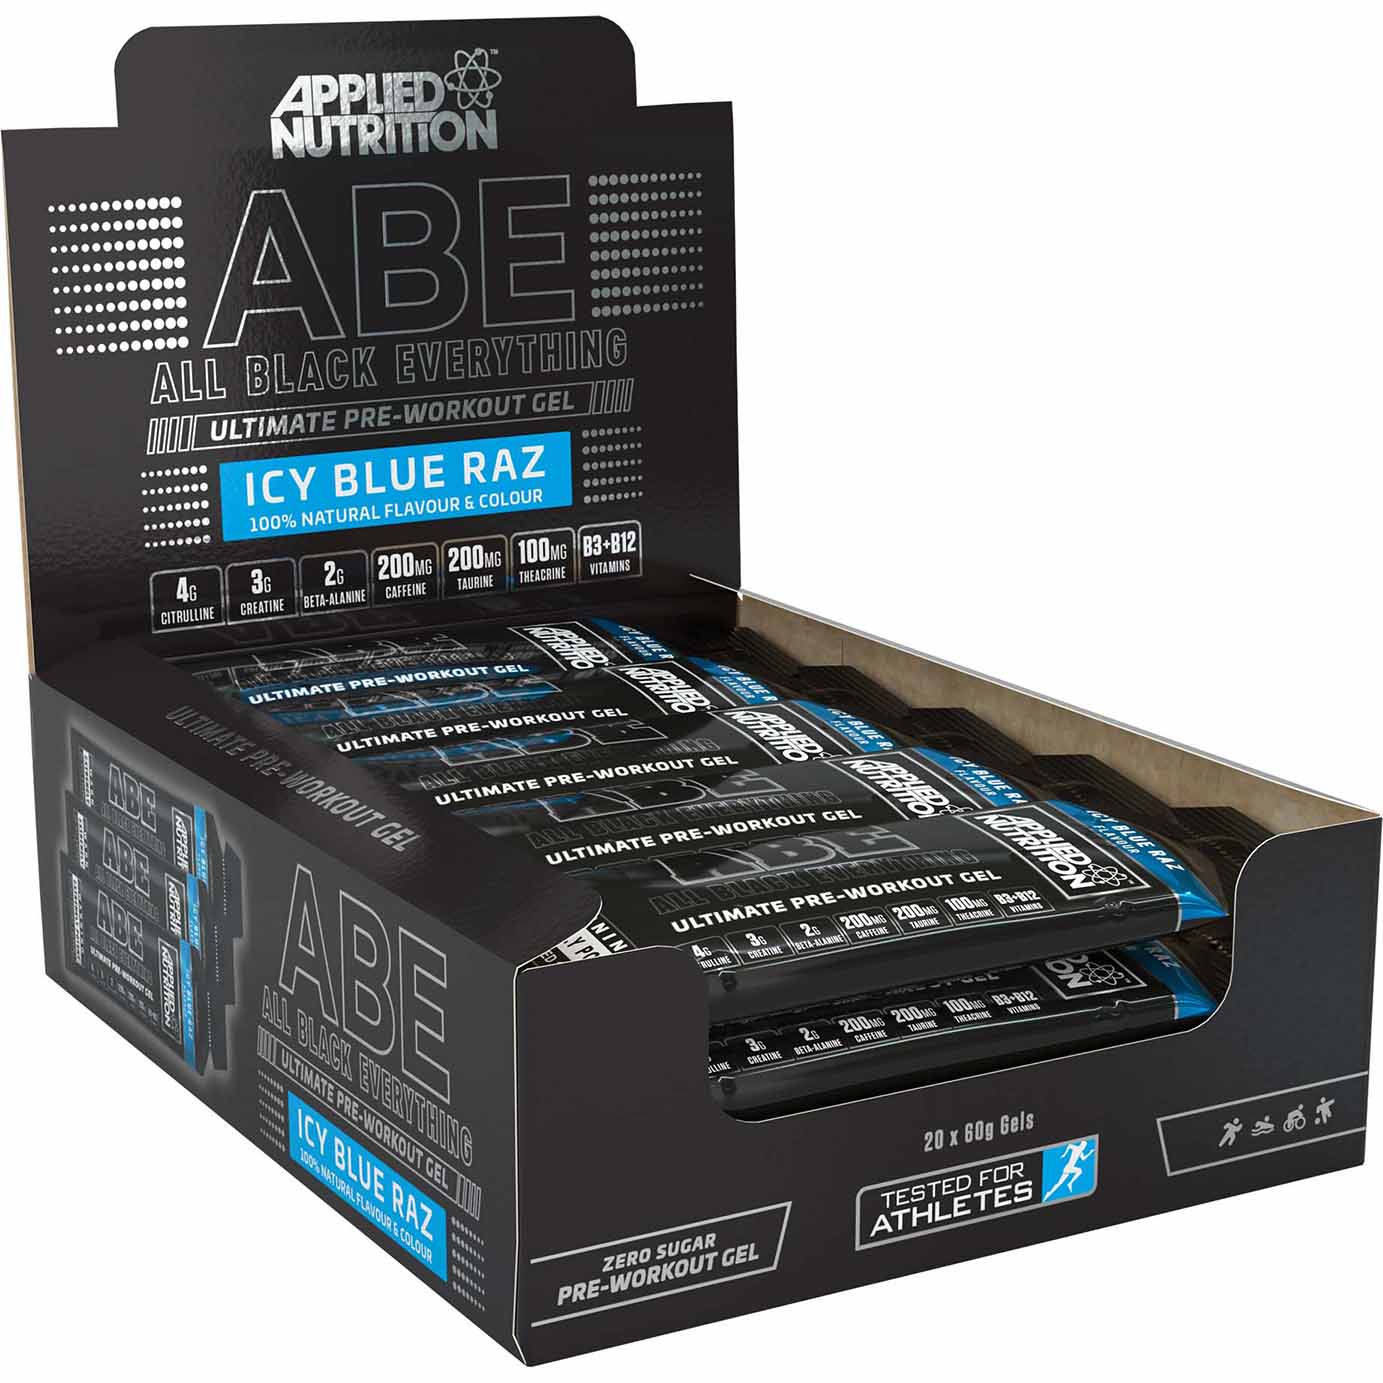 Applied Nutrition ABE Ultimate Pre Workout Gel Box of 20 Pieces Icy Blue Raz